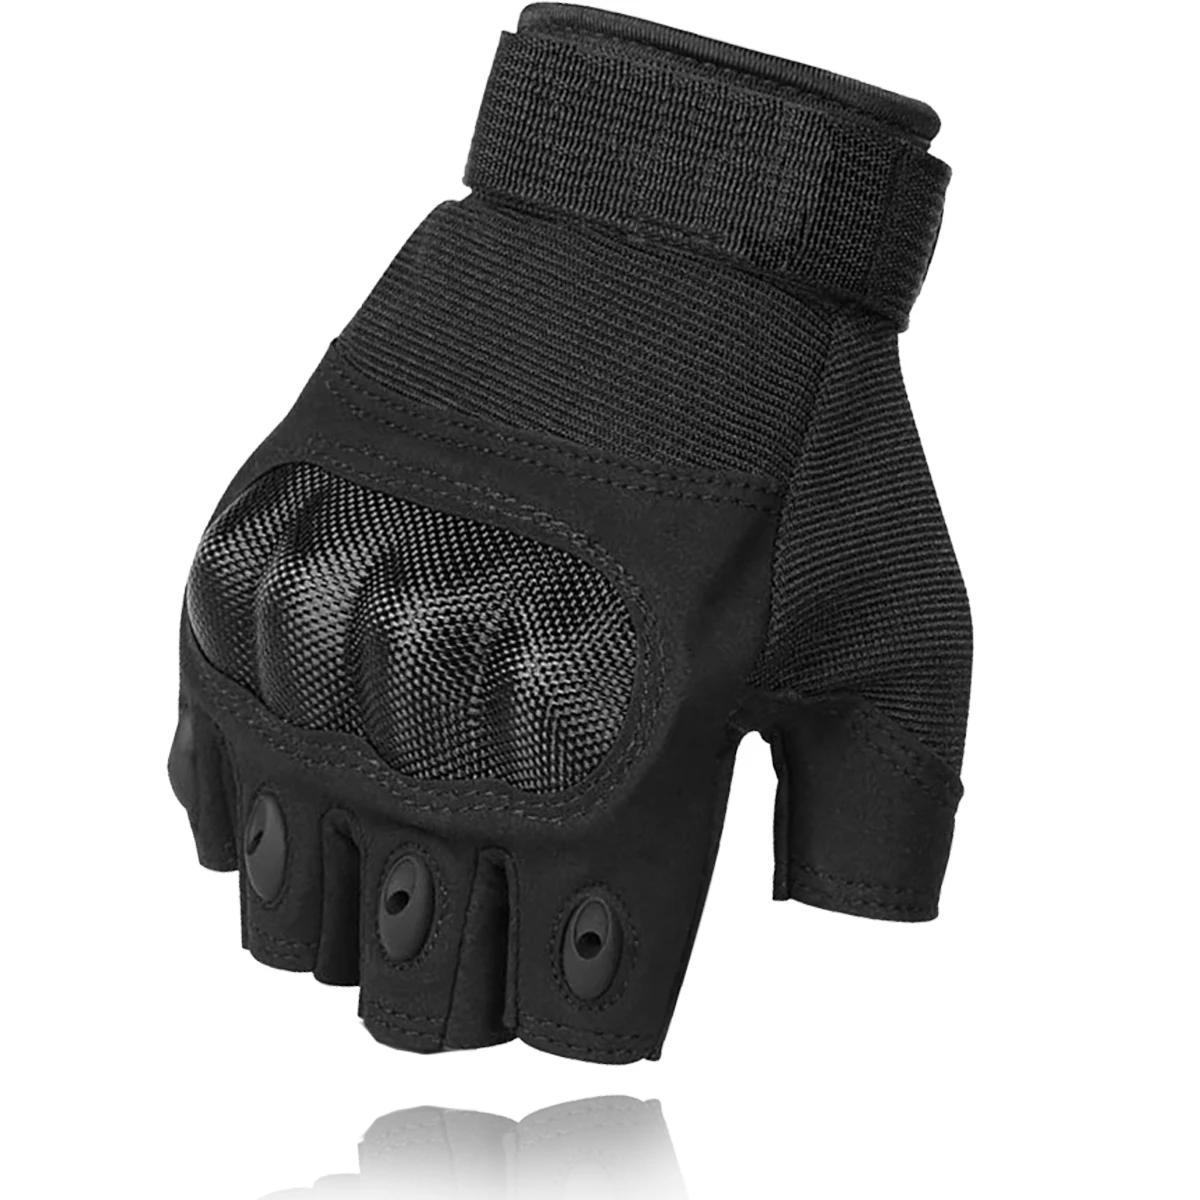 

Military Half Knuckle Protective Gloves Cycling Hunting Airsoft Shooting Paintball Games Fingerless Tactical Gloves for Men